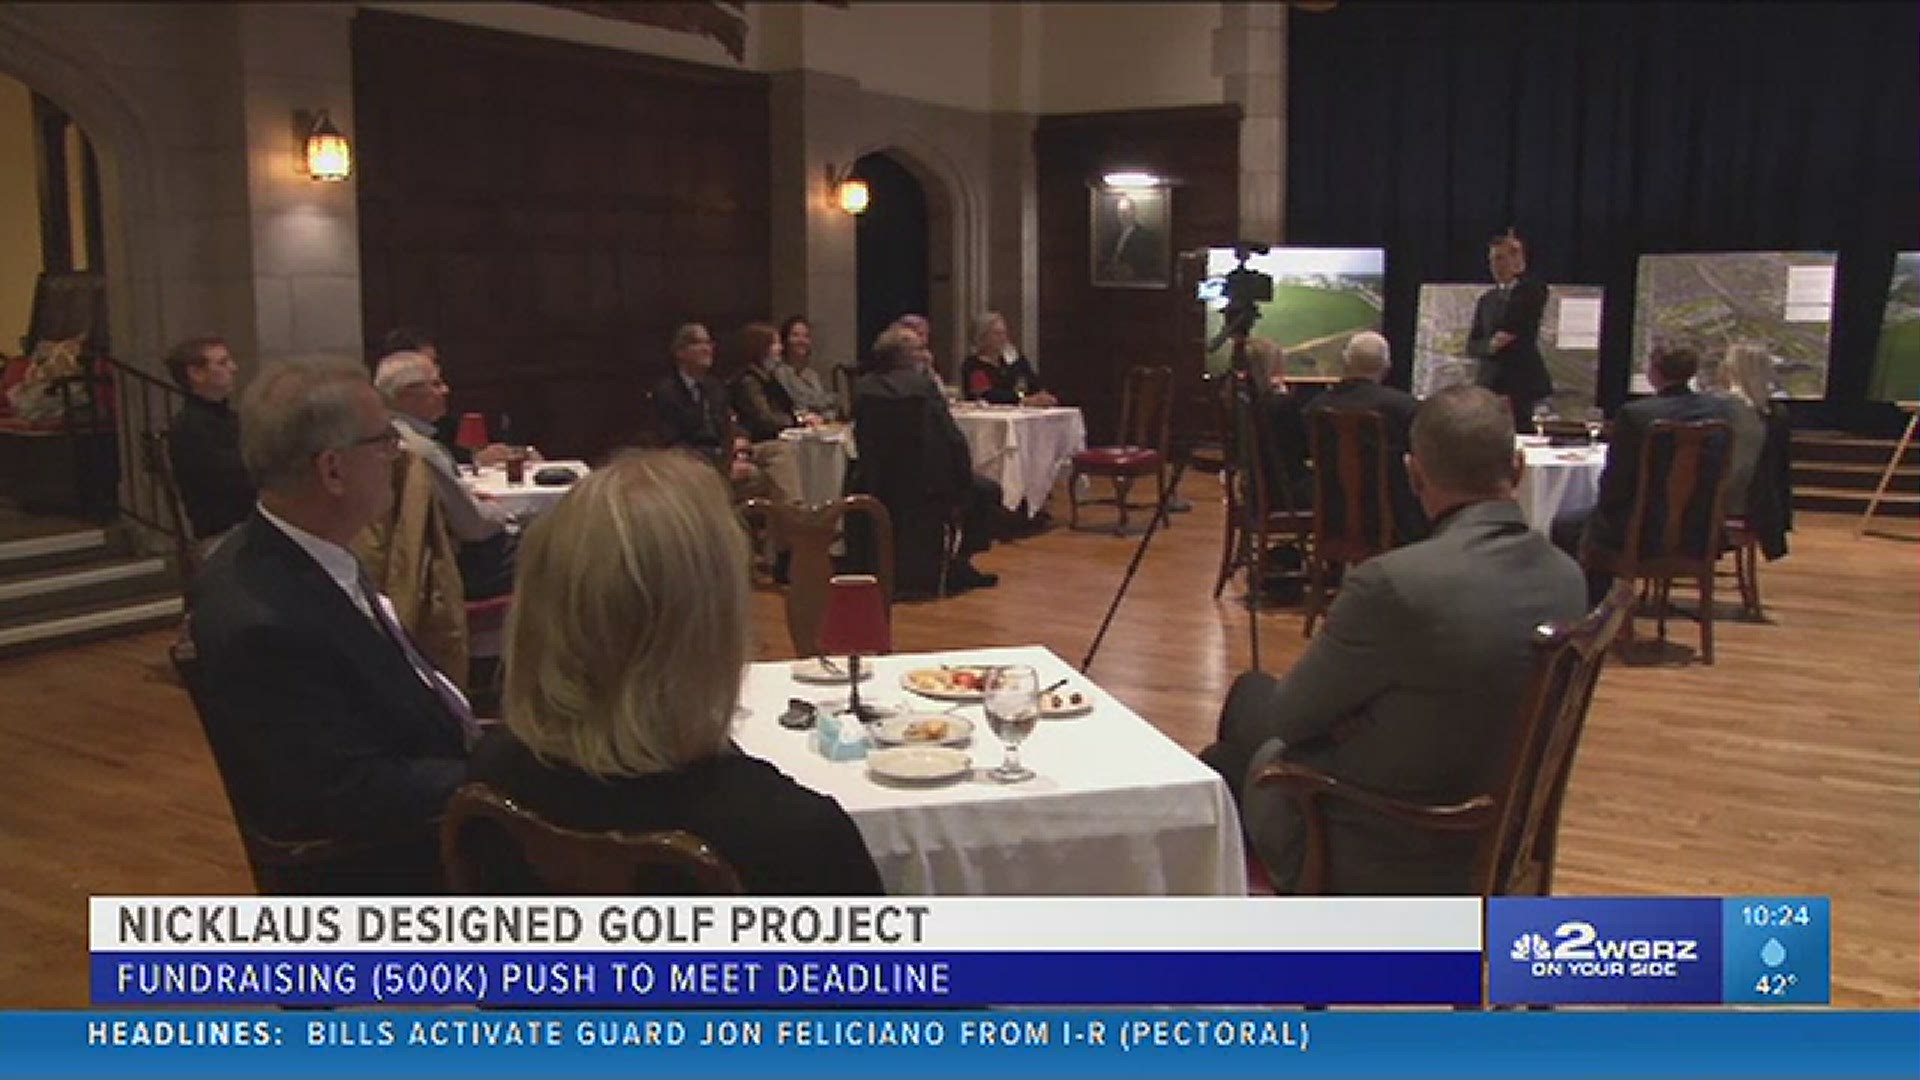 An update on the effort to have a Jack Nicklaus designed golf course built in South Buffalo.